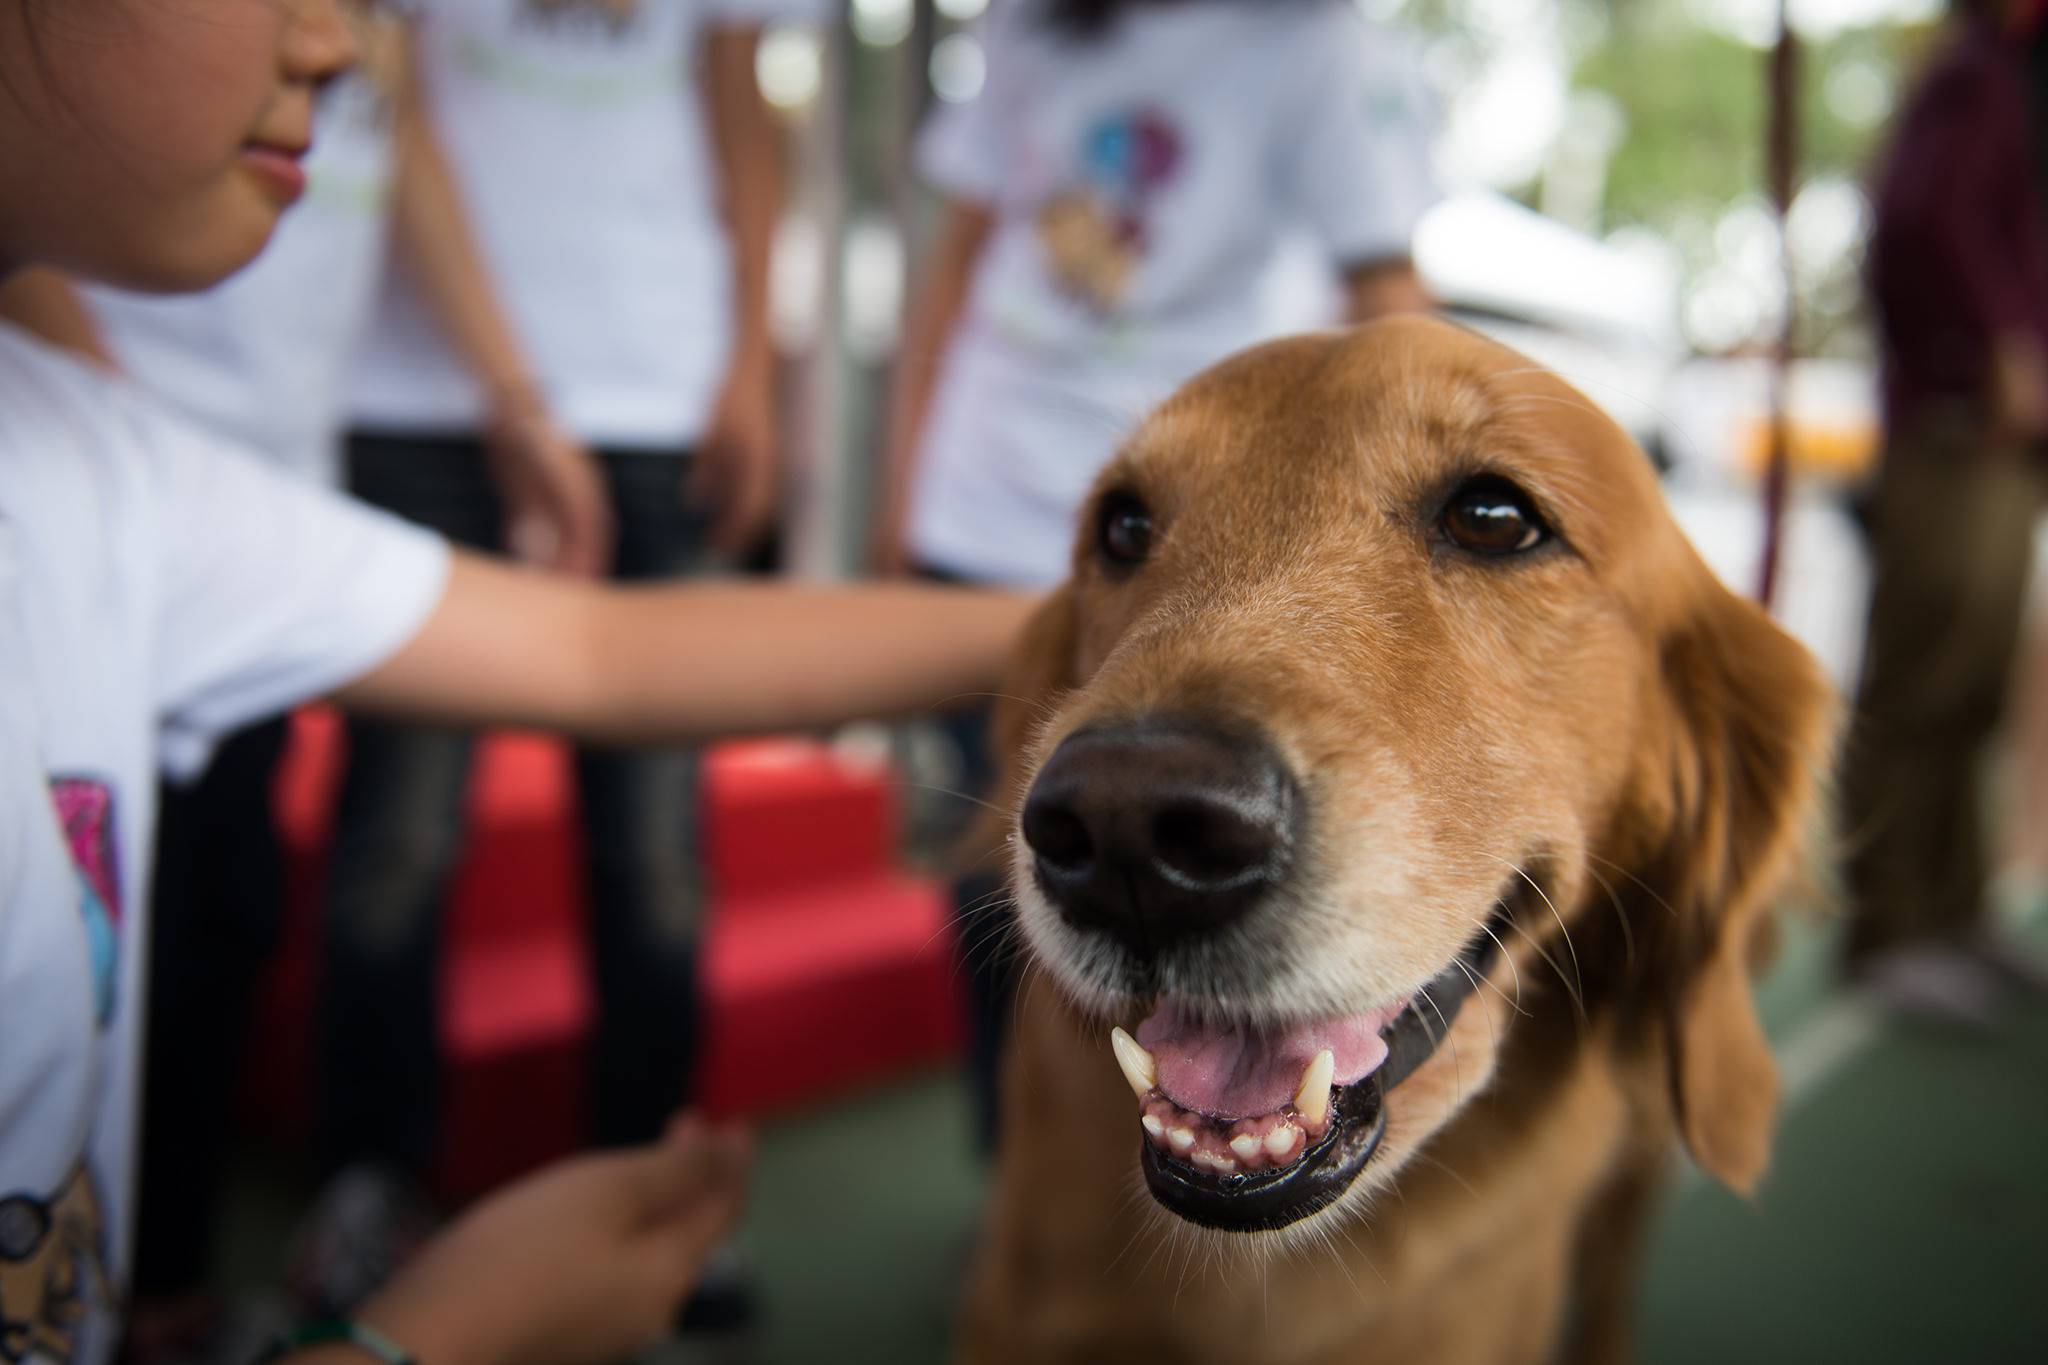 People in China are buying tech for their pets